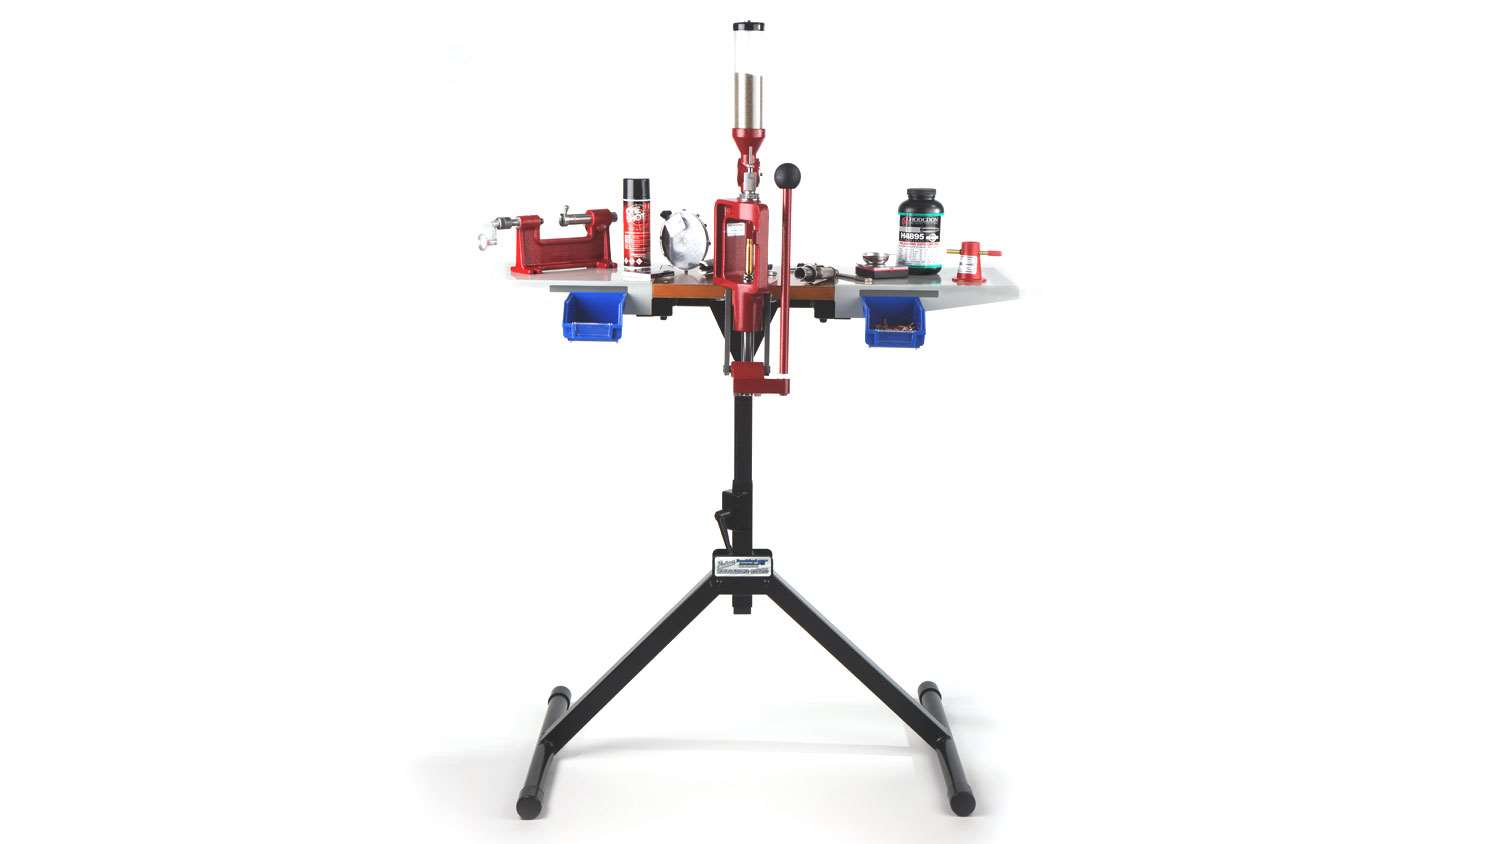 The Frankford Arsenal Platinum Reloading stand is the base of this downsized reloading setup.